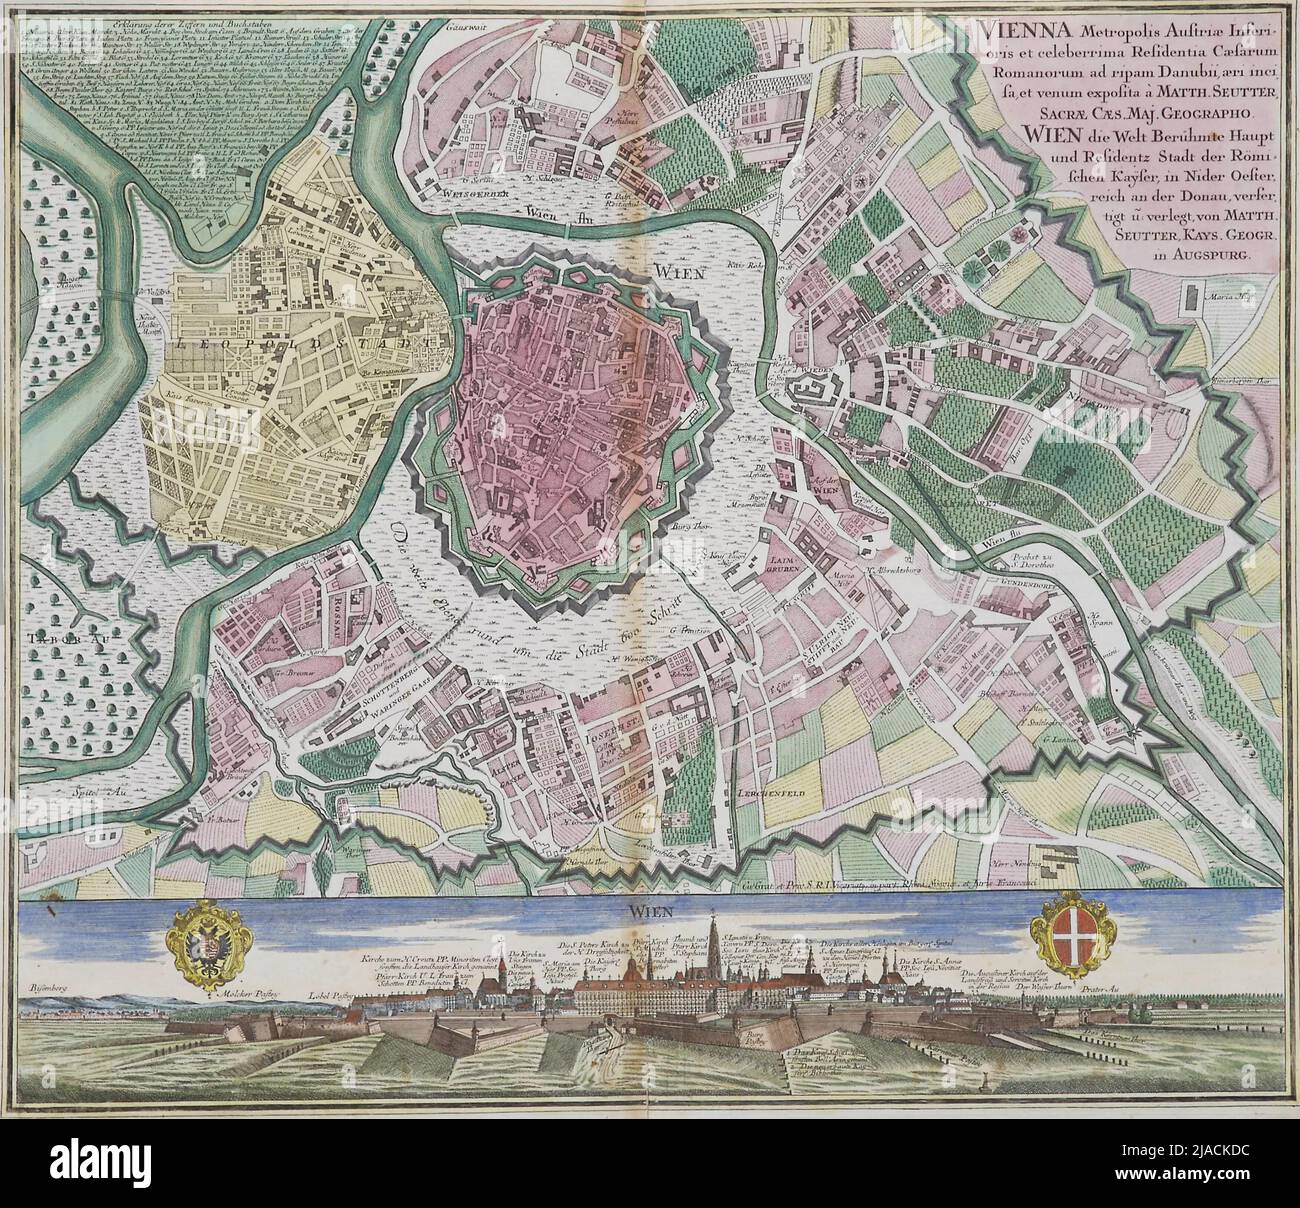 Vienna Metropolis Austria (...)/Vienna the world famous Haupt and Residential City of the Römi =/Schen Kayser, in Nider Austria on the Danube, (...) '. Plan of the City of Vienna with overall view (Panorama) from southwest. Matthäus Seutter (1678-1757), drawer Stock Photo